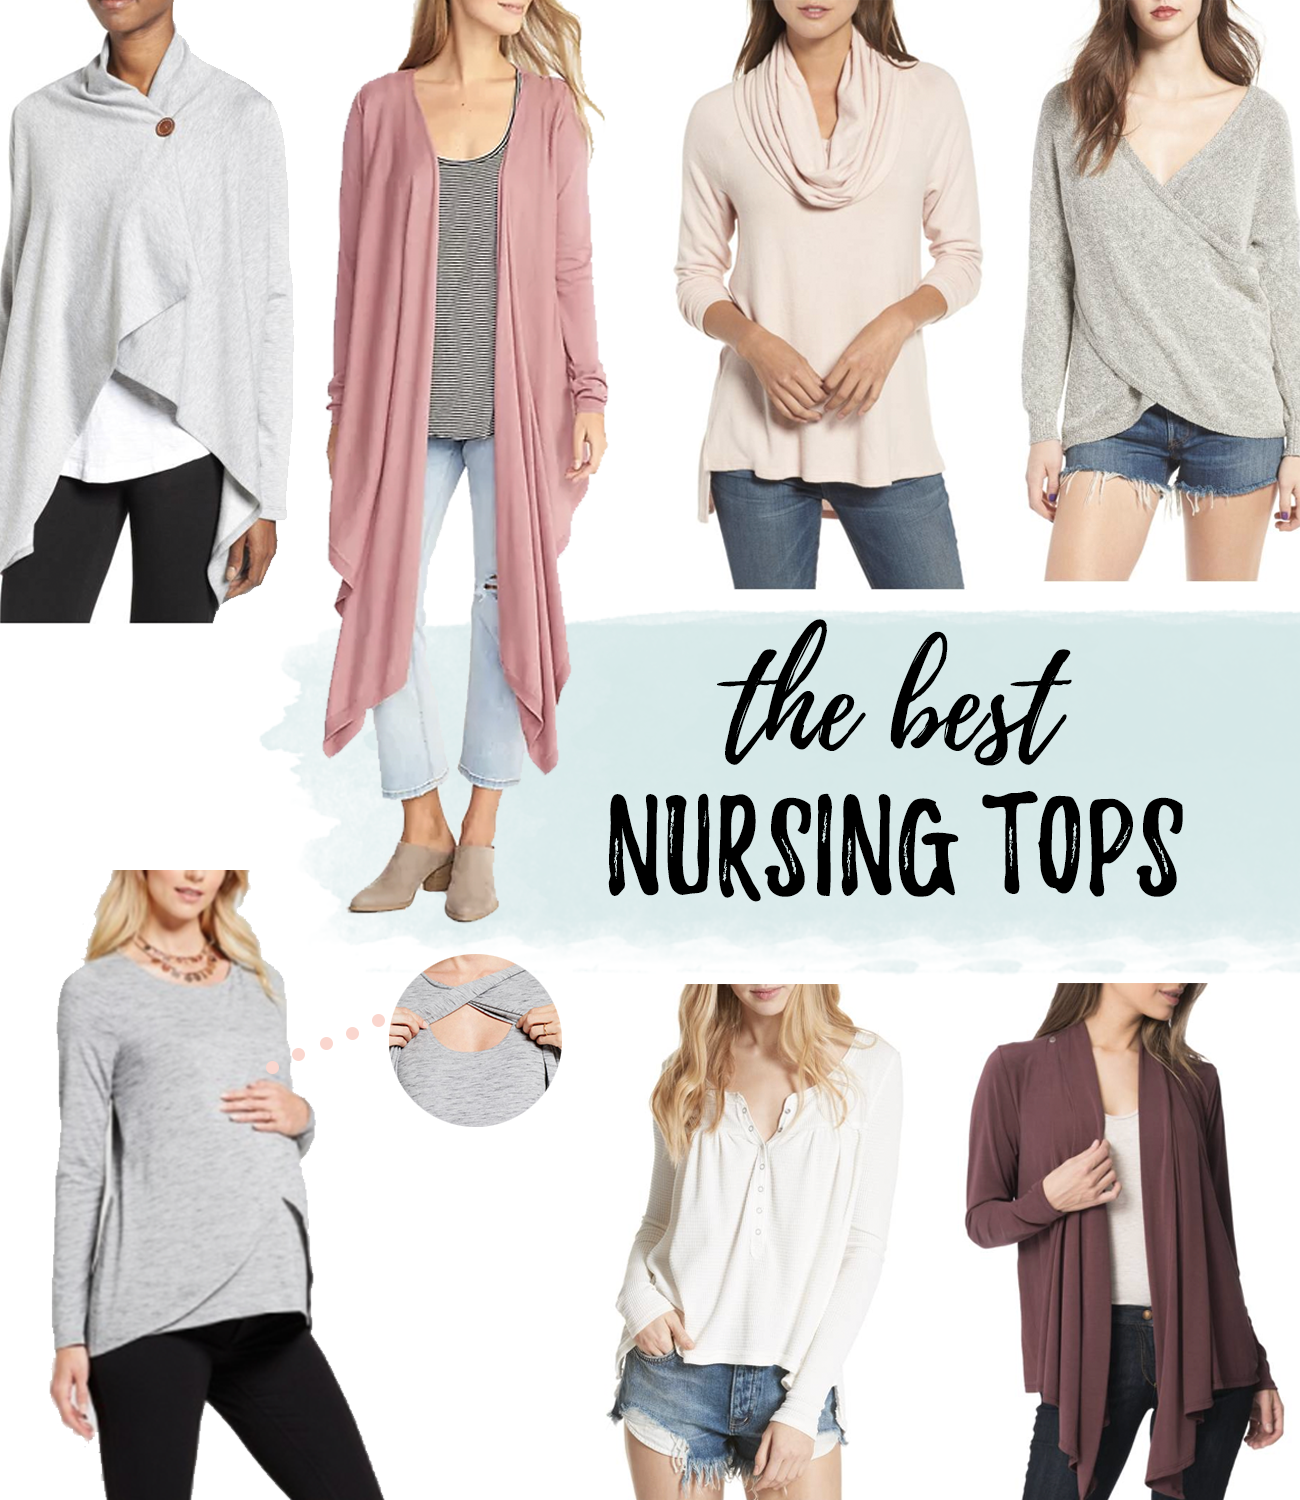 The Best Nursing and Breastfeeding Tops for New Moms